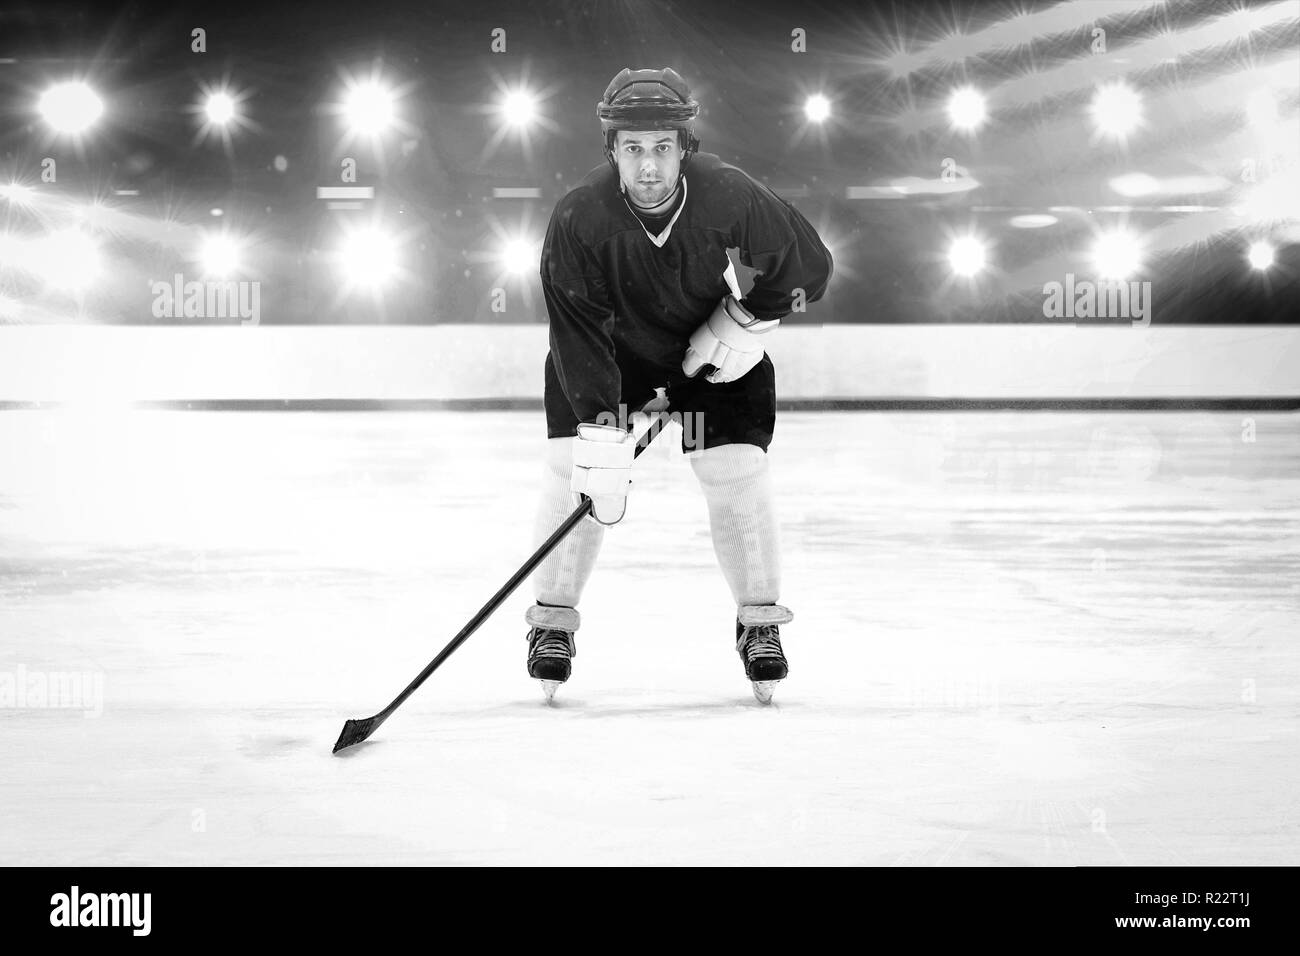 Composite image of player playing ice hockey Stock Photo